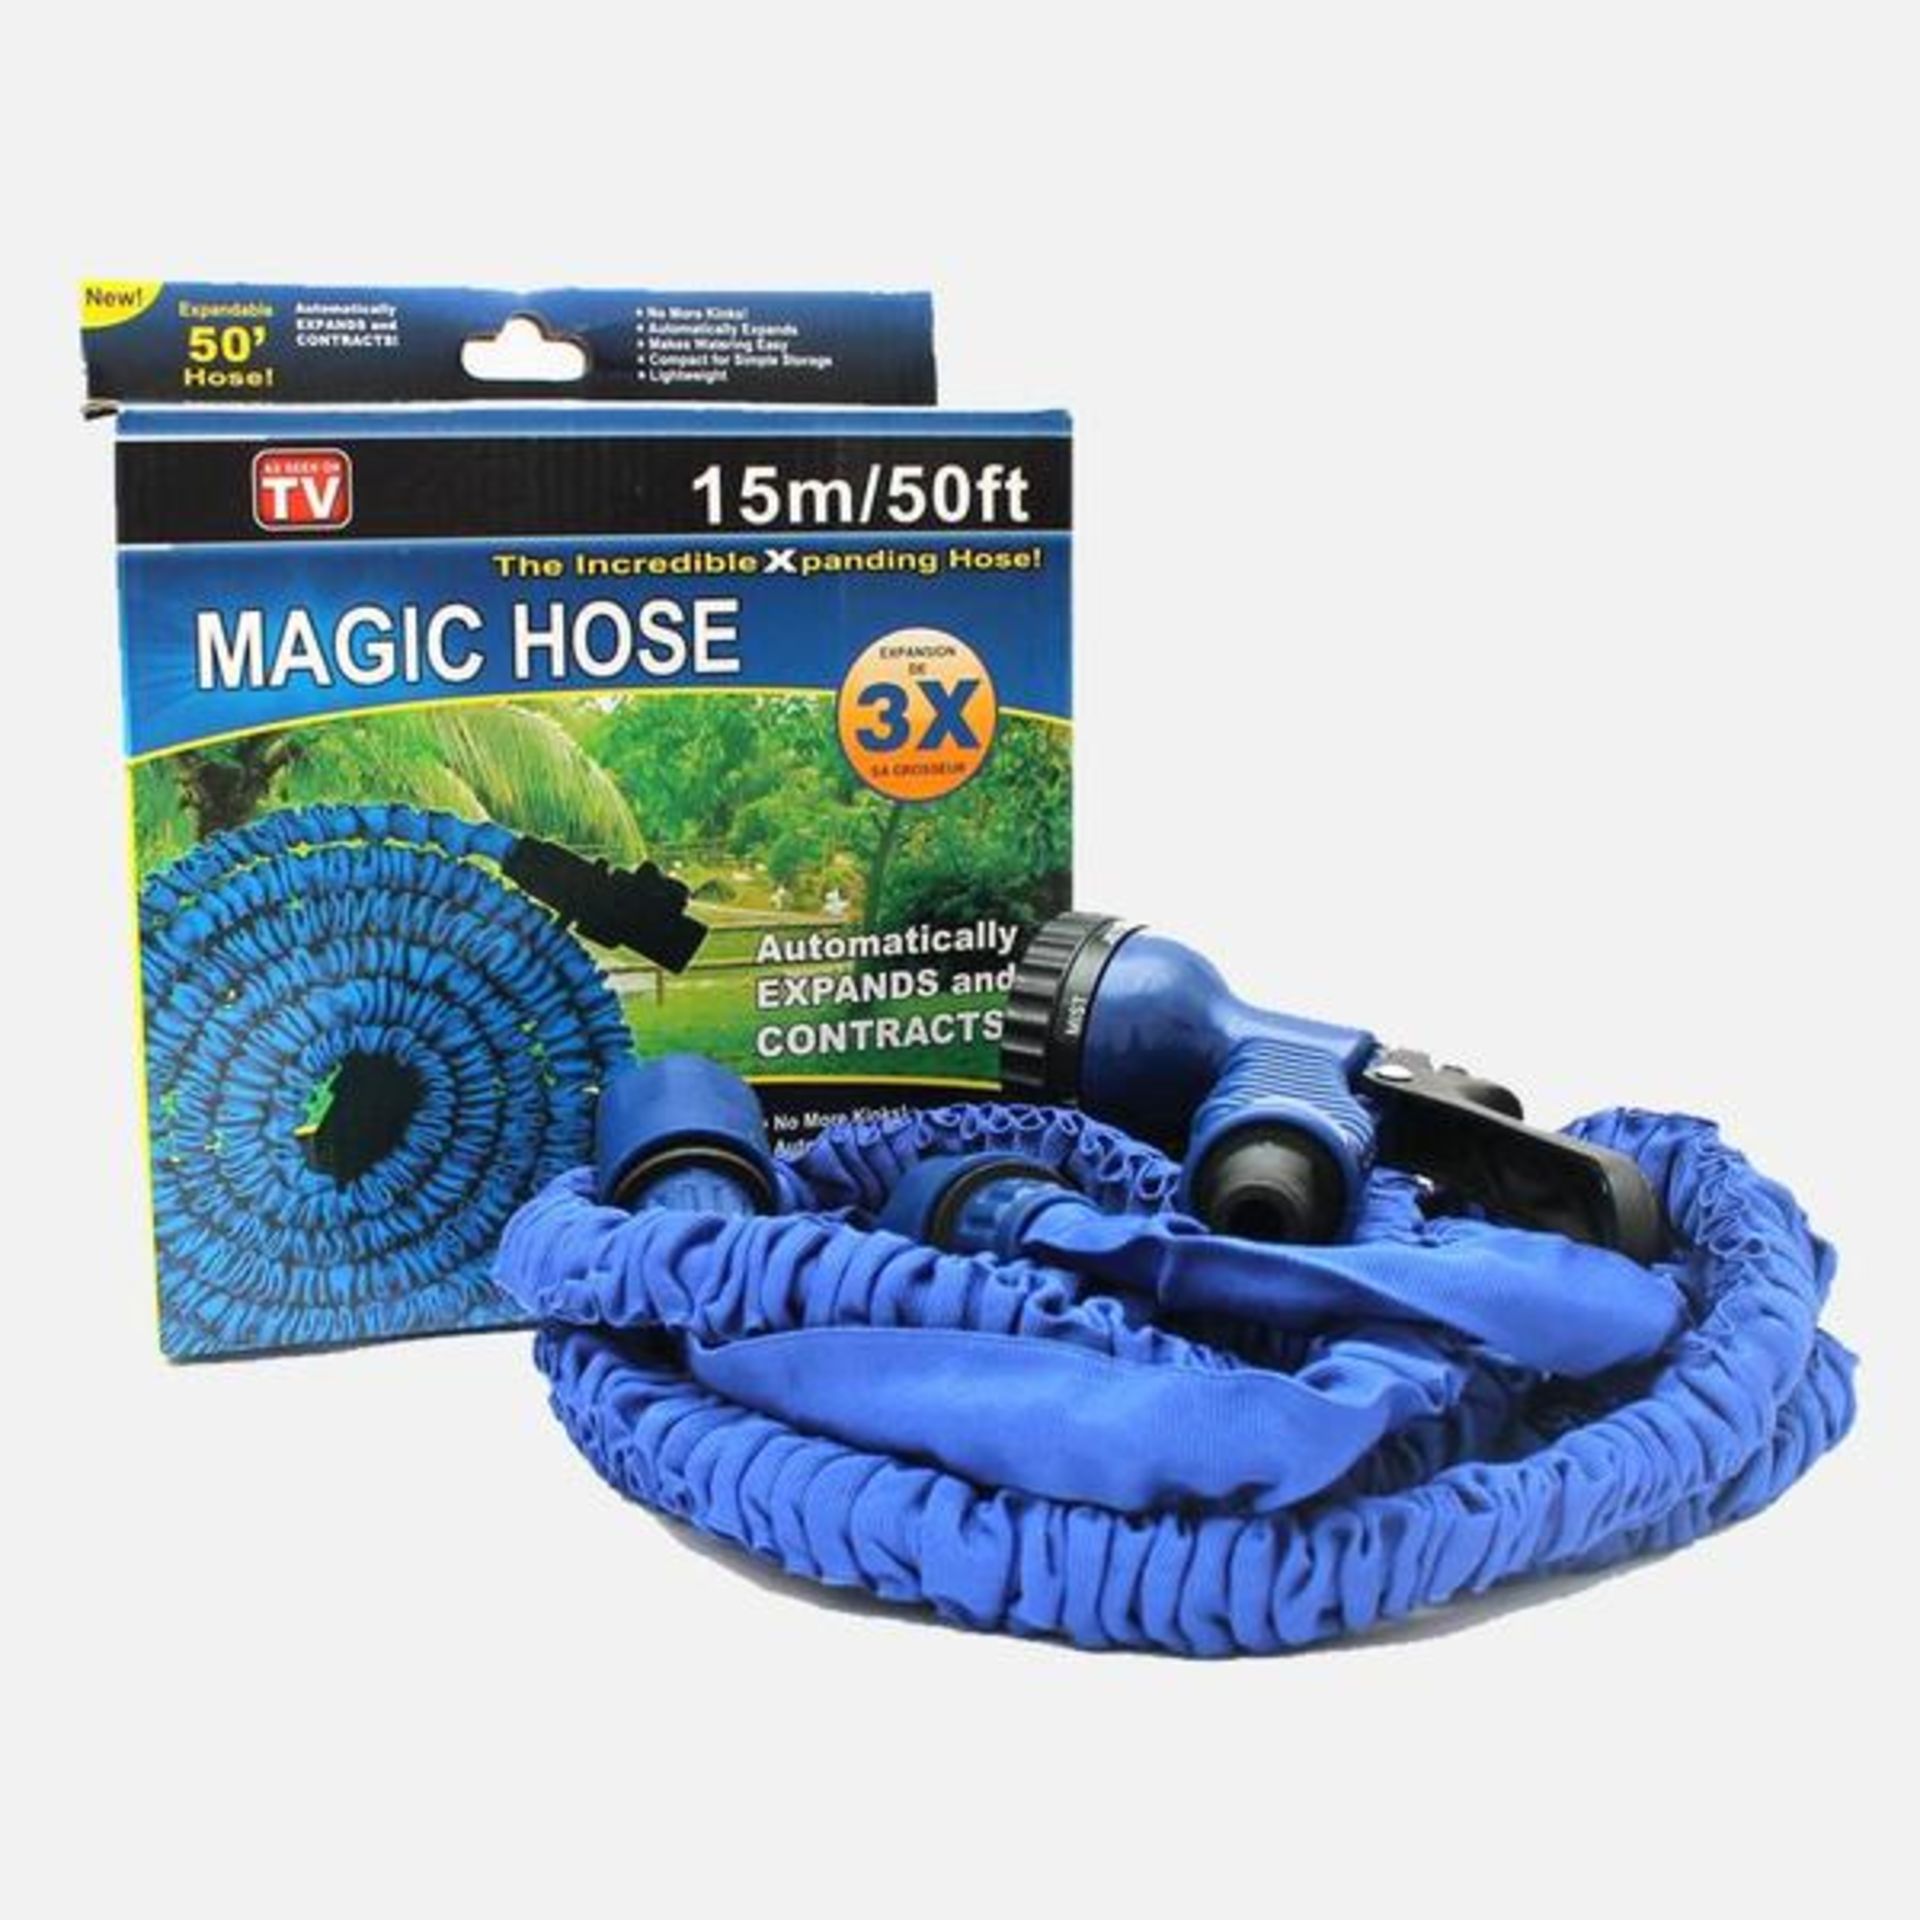 V Brand New 50 foot (15 metre) Incredible Magic Hose (As Seen On TV) - Automatically Expands And